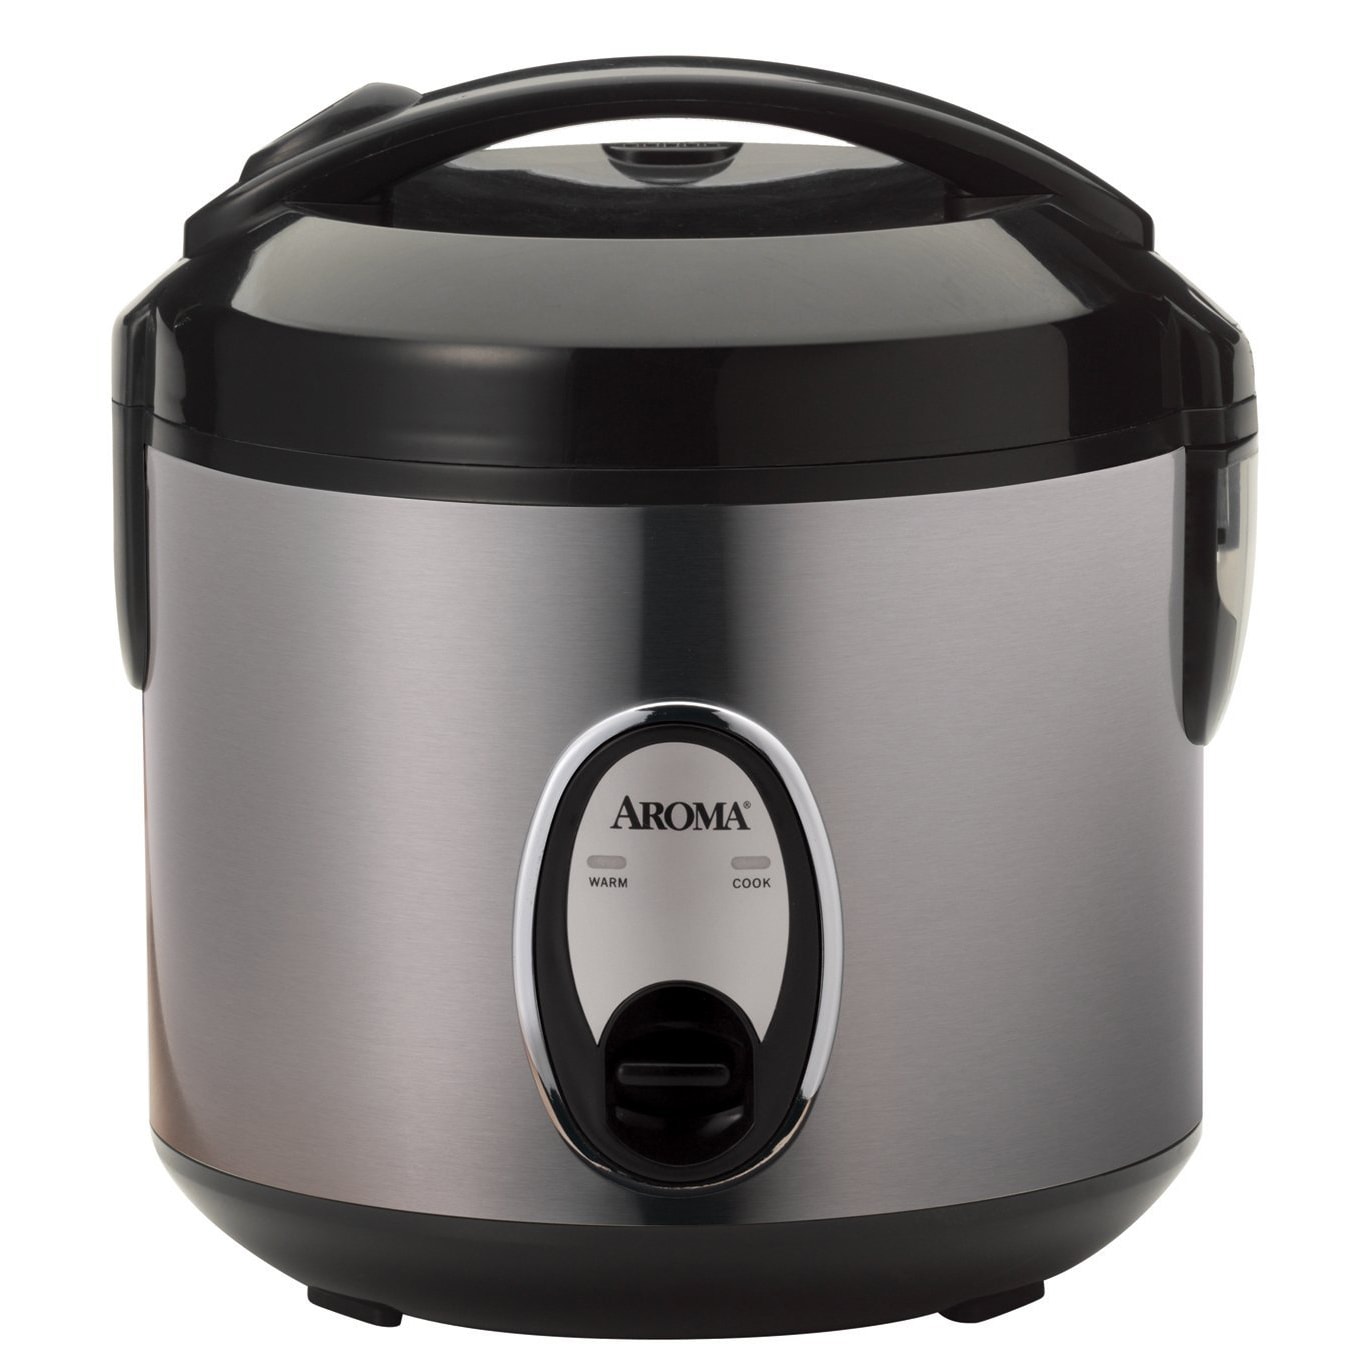  Aroma Rice Cooker